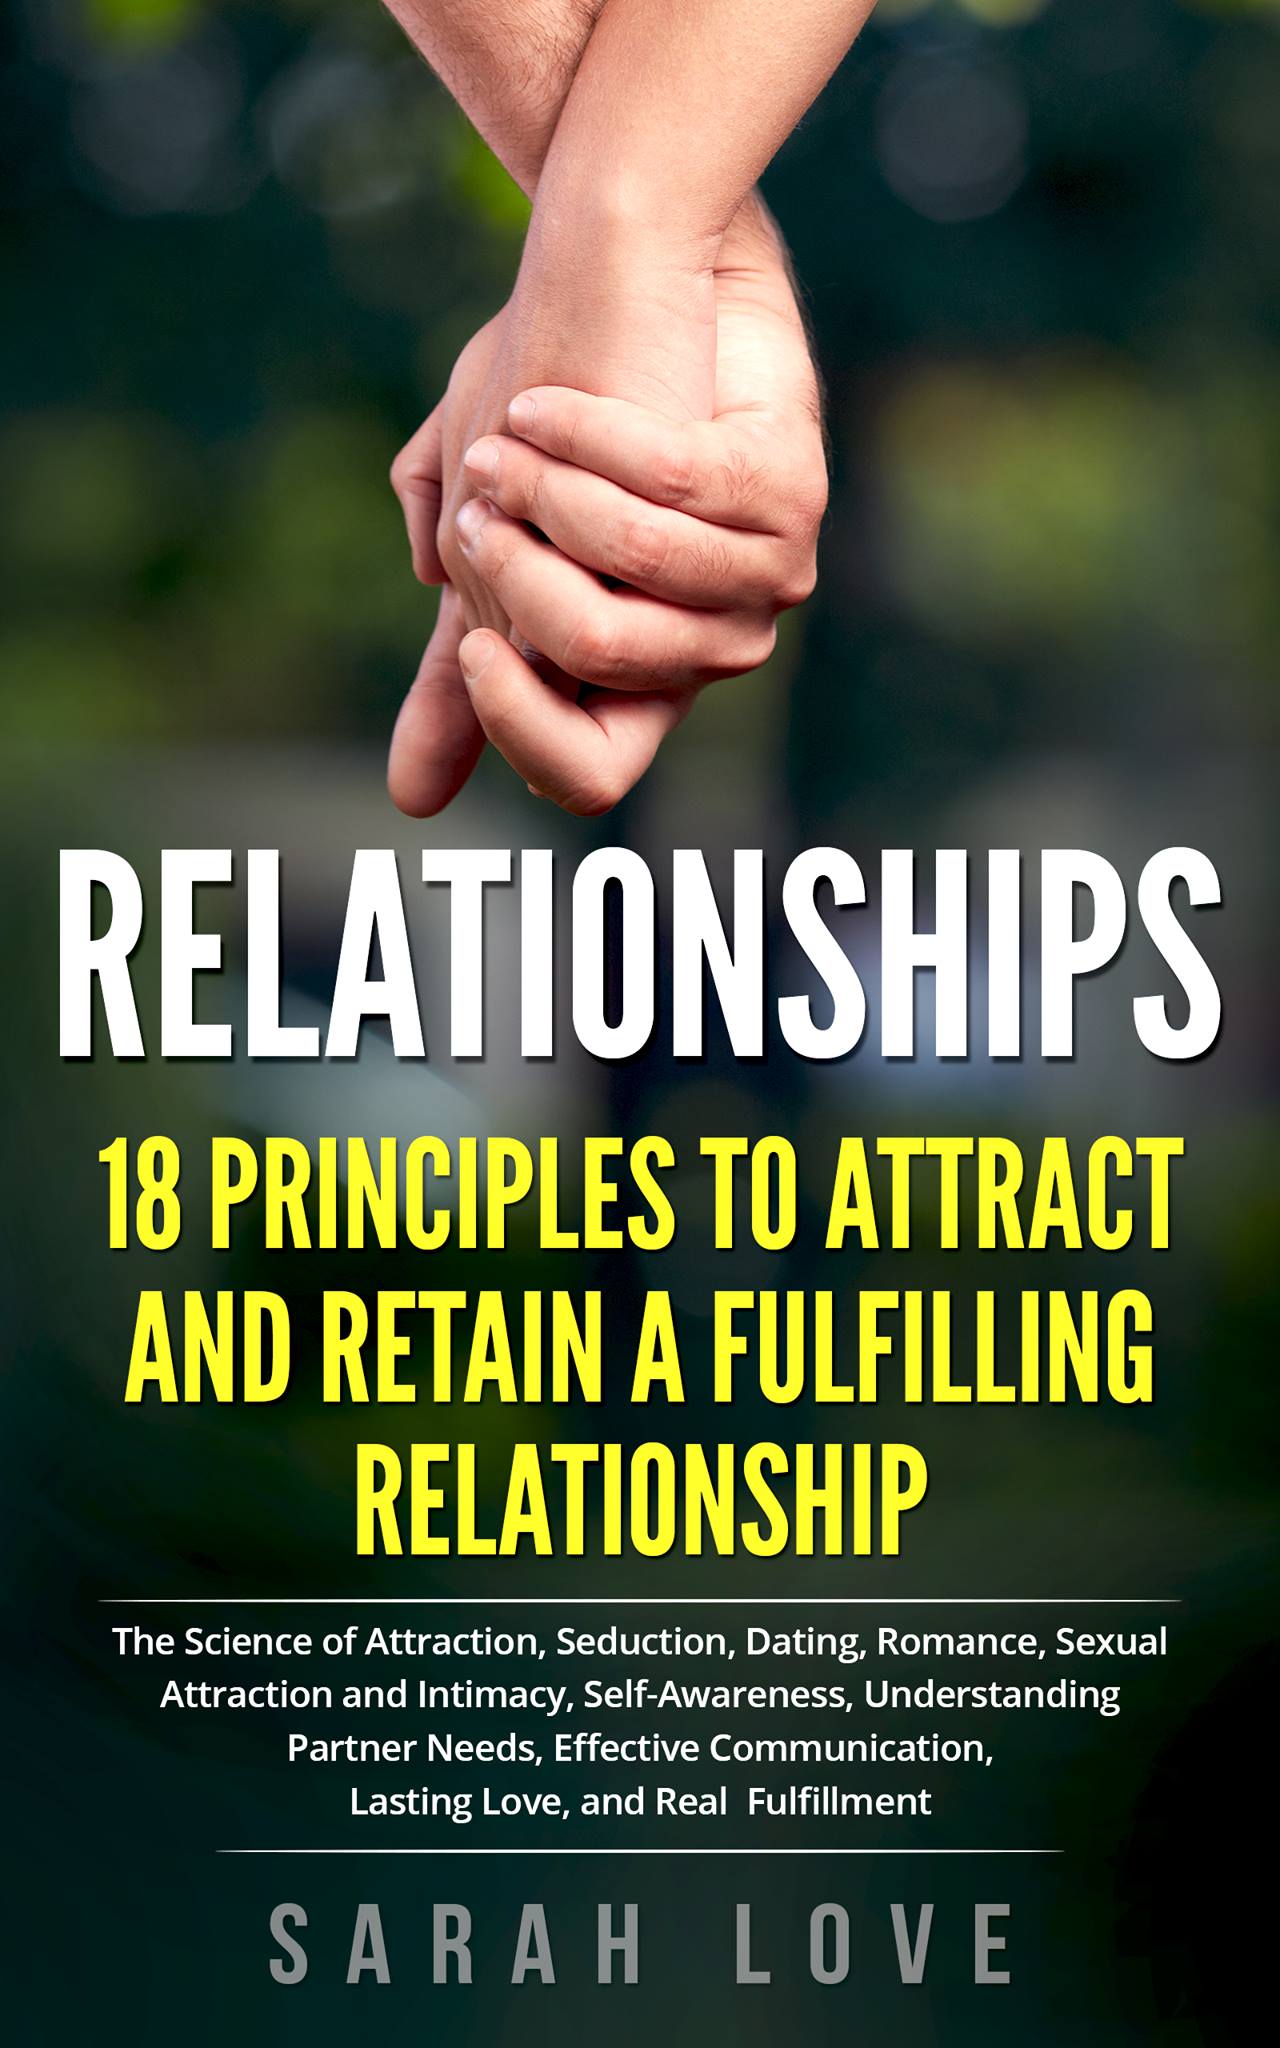 Relationships: 18 Principles to Attract and Retain a Fulfilling Relationship